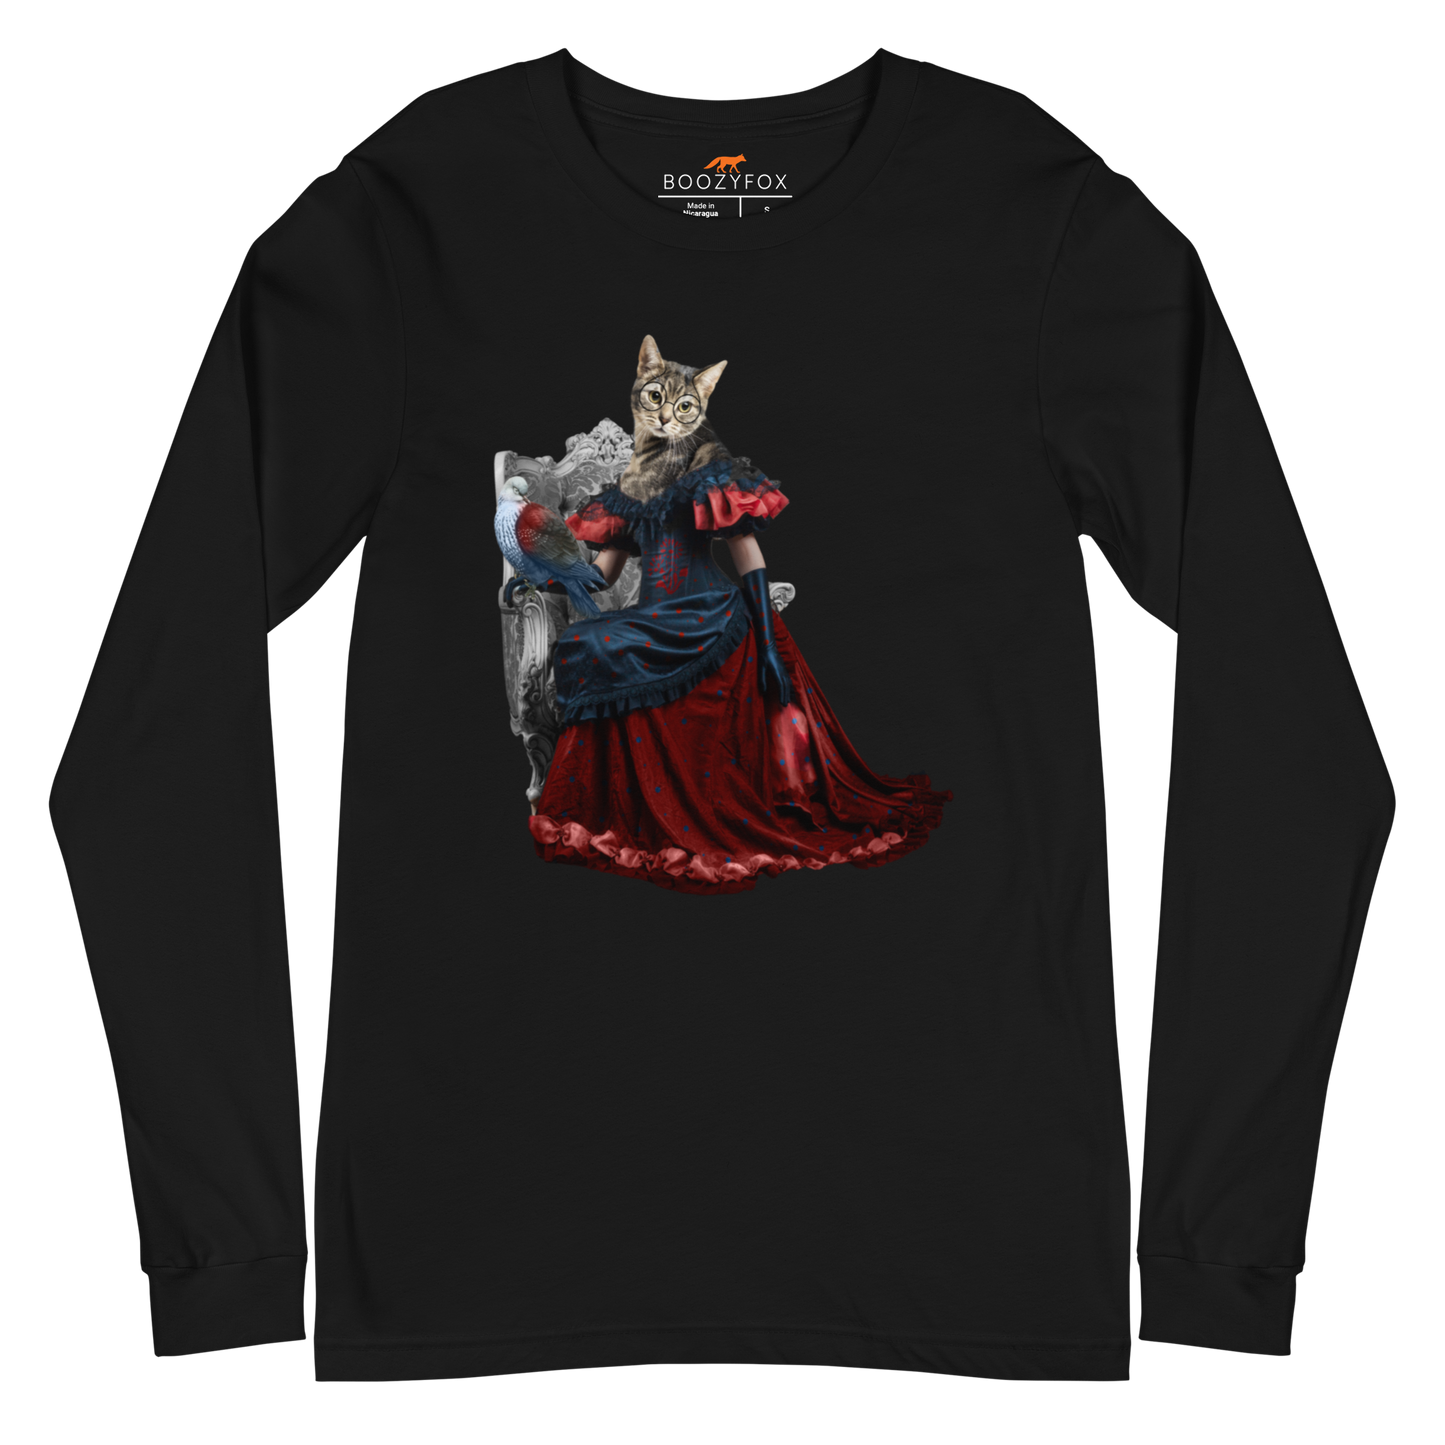 Black Cat Long Sleeve Tee featuring an Anthropomorphic Cat graphic on the chest - Funny Cat Long Sleeve Graphic Tees - Boozy Fox